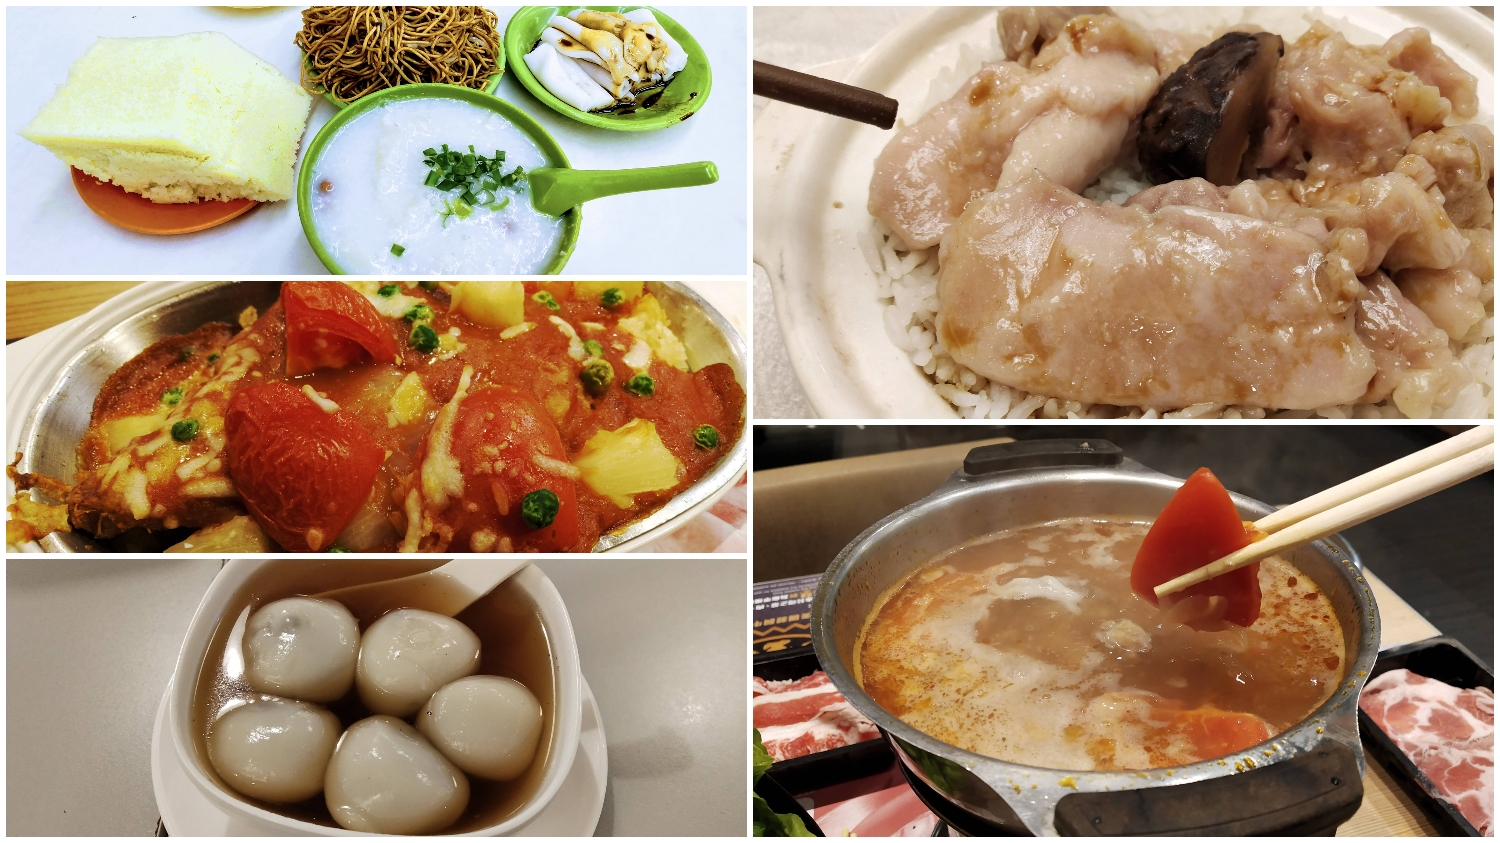 Share Frank's post about Hong Kong local food for travelers to keep warm 